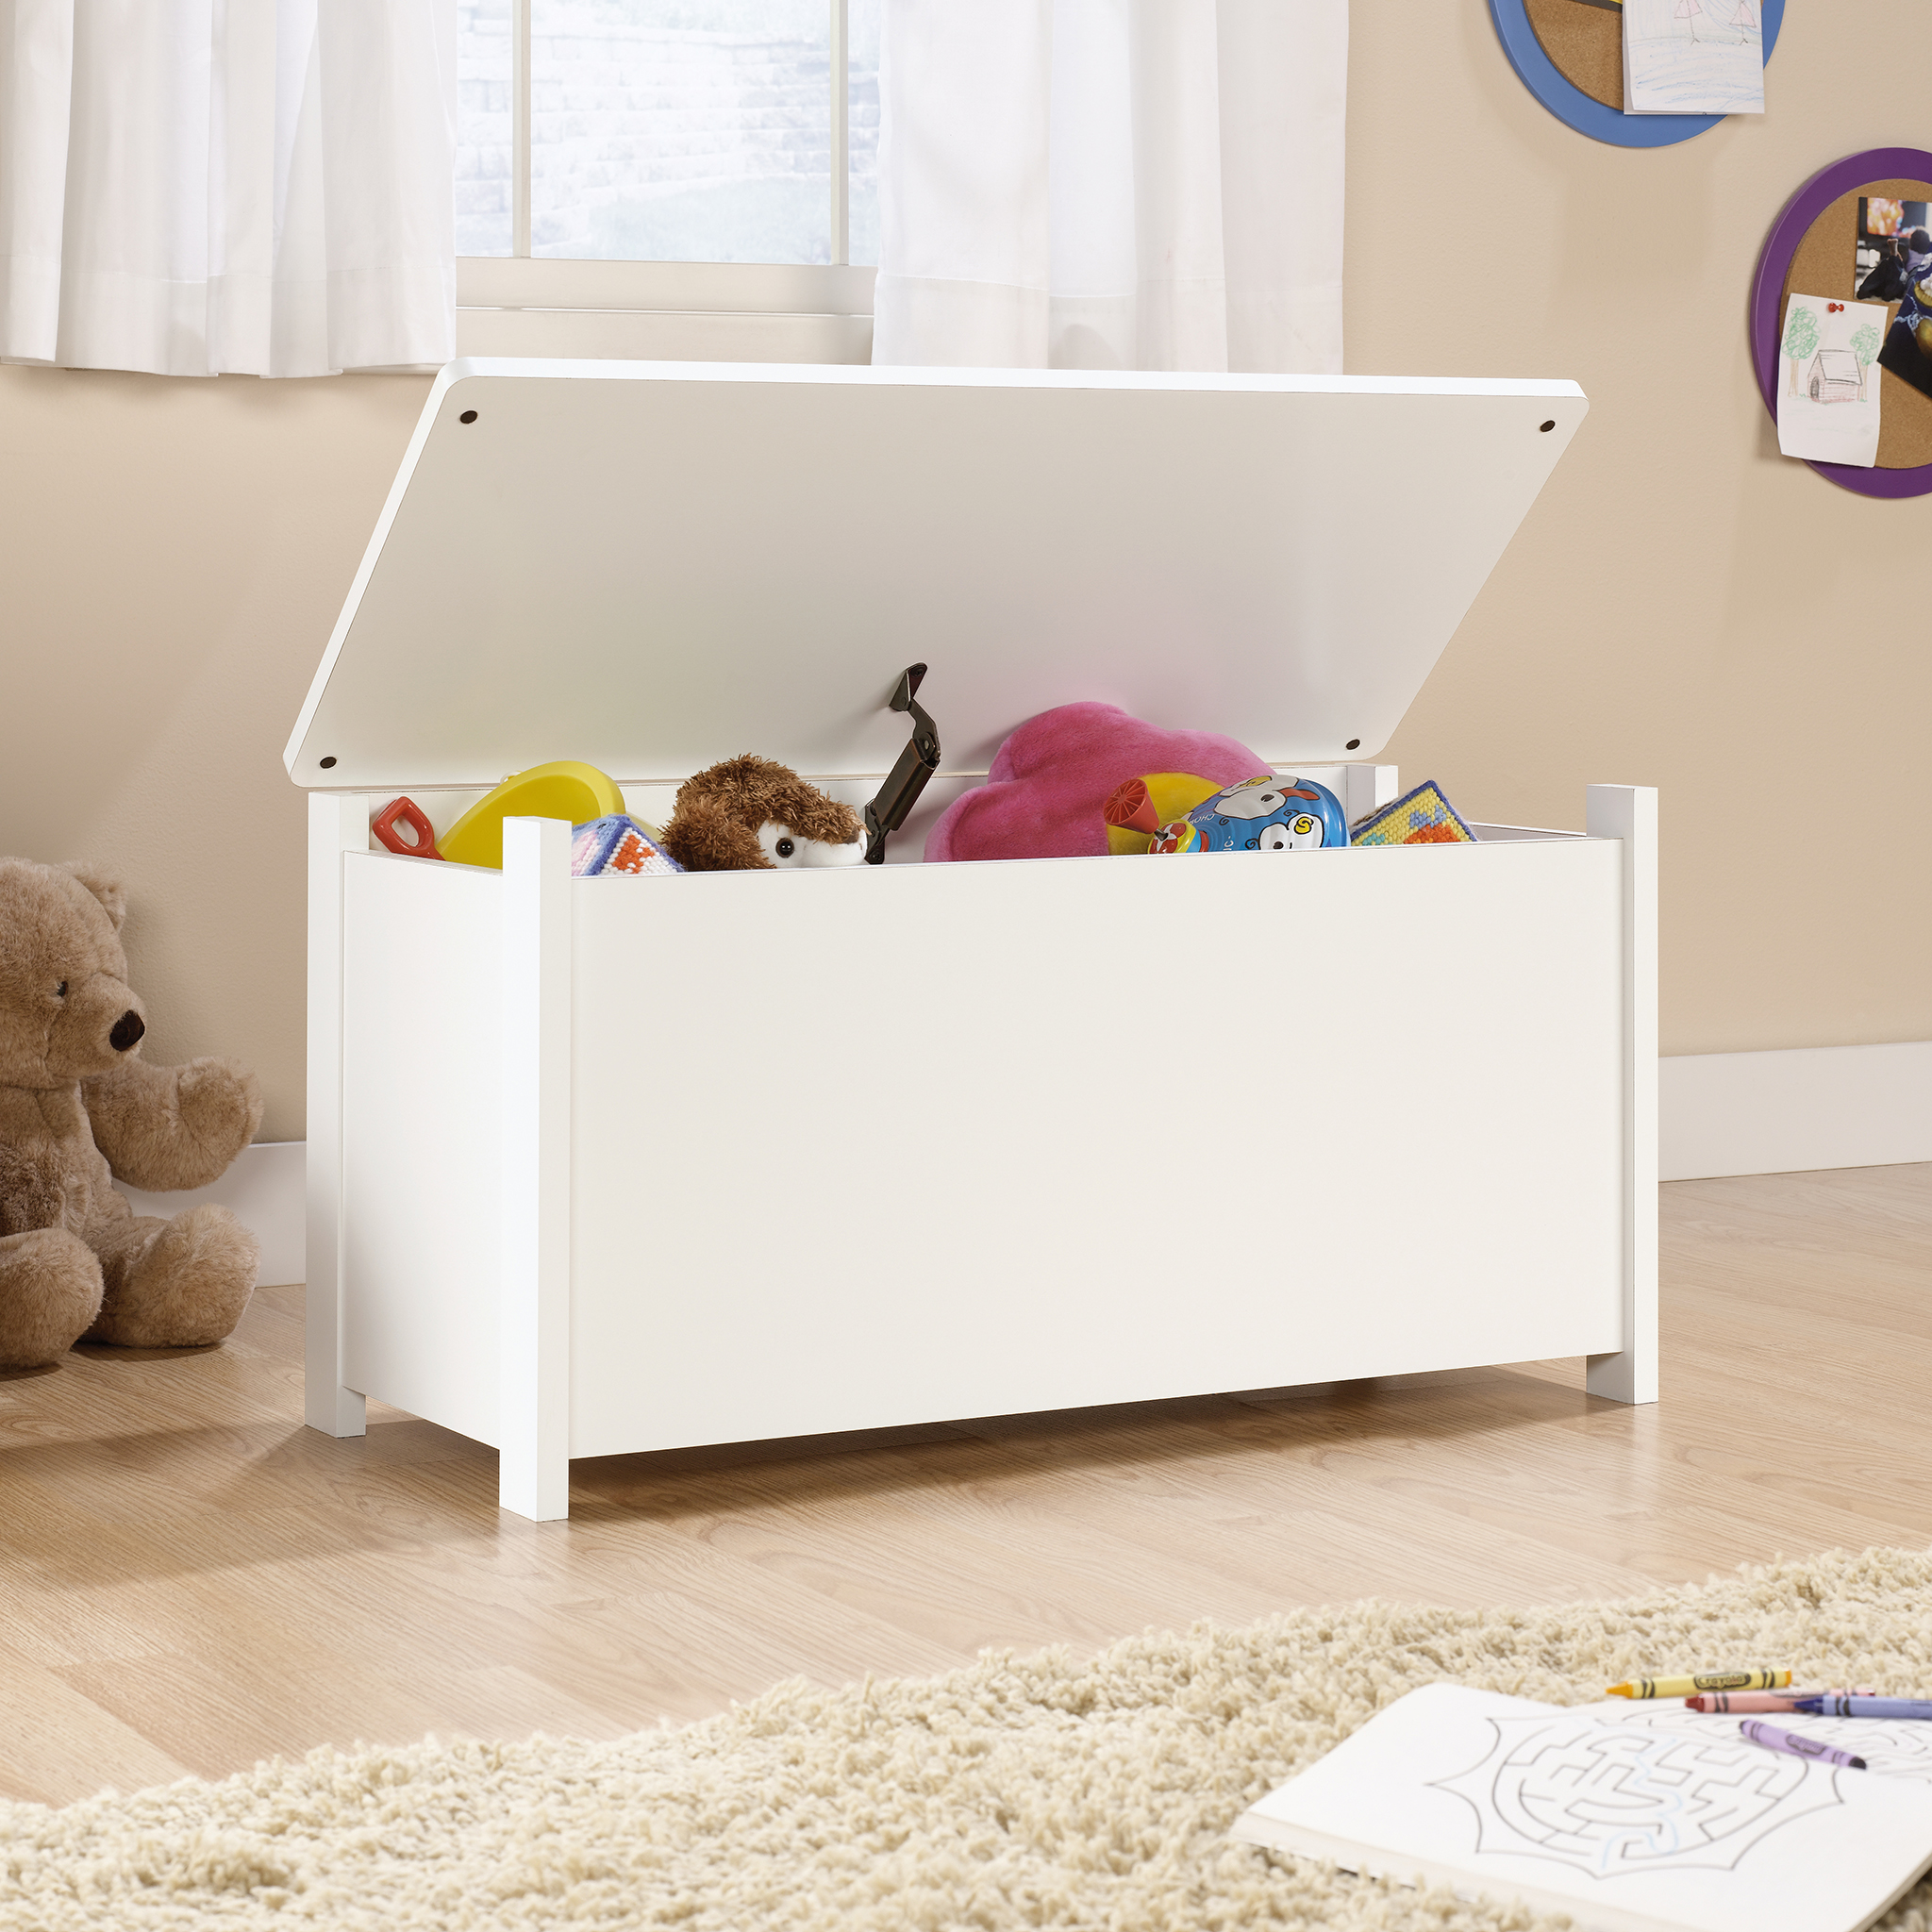 Sauder Beginnings Hinged Safety Top Wooden Toy Chest/Bench, Soft White Finish - image 5 of 9